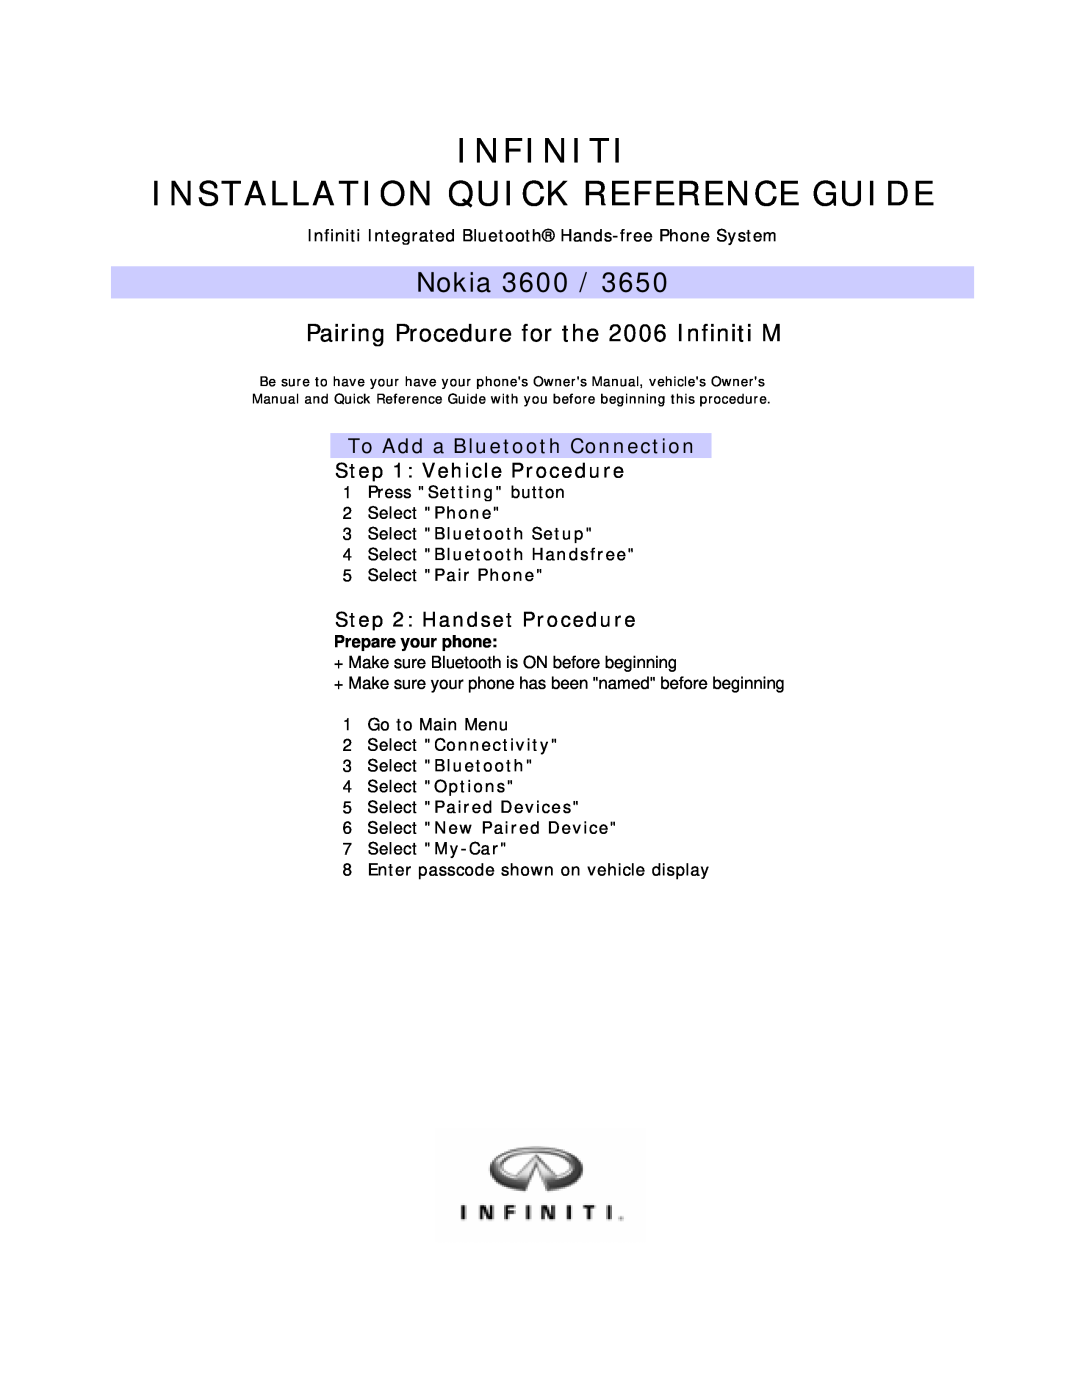 Infiniti 3650 owner manual Infiniti Installation Quick Reference Guide, Nokia 3600, To Add a Bluetooth Connection 